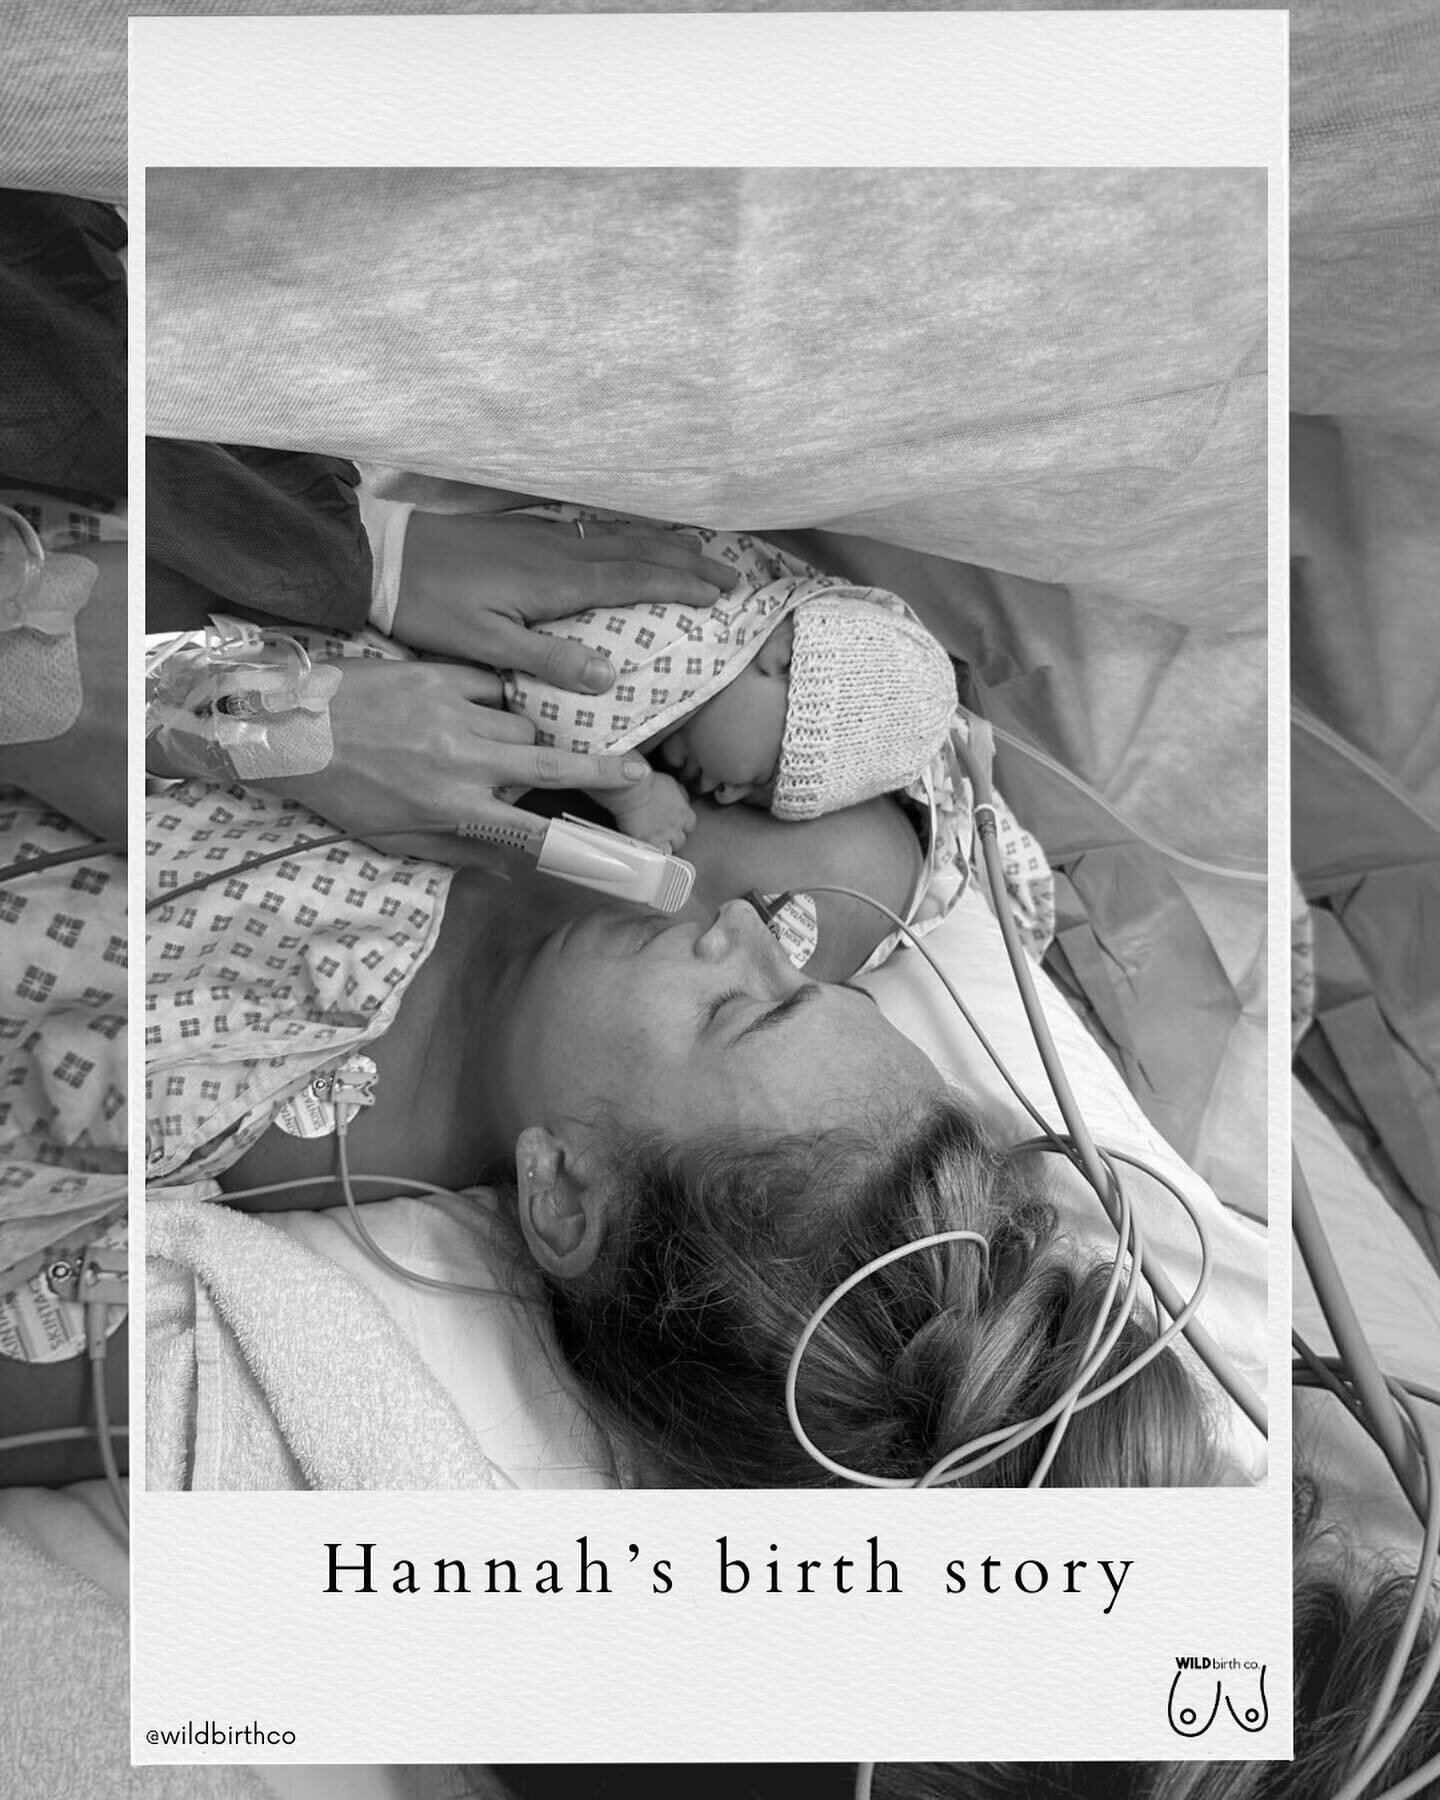 Thank you @hans_duggsxox for sharing your birth story with us 🌸
Hannah had meconium in her waters which put her in the high risk category but this is a beautiful story of how Hannah used Hypnobirthing techniques to give herself the opportunity to ha